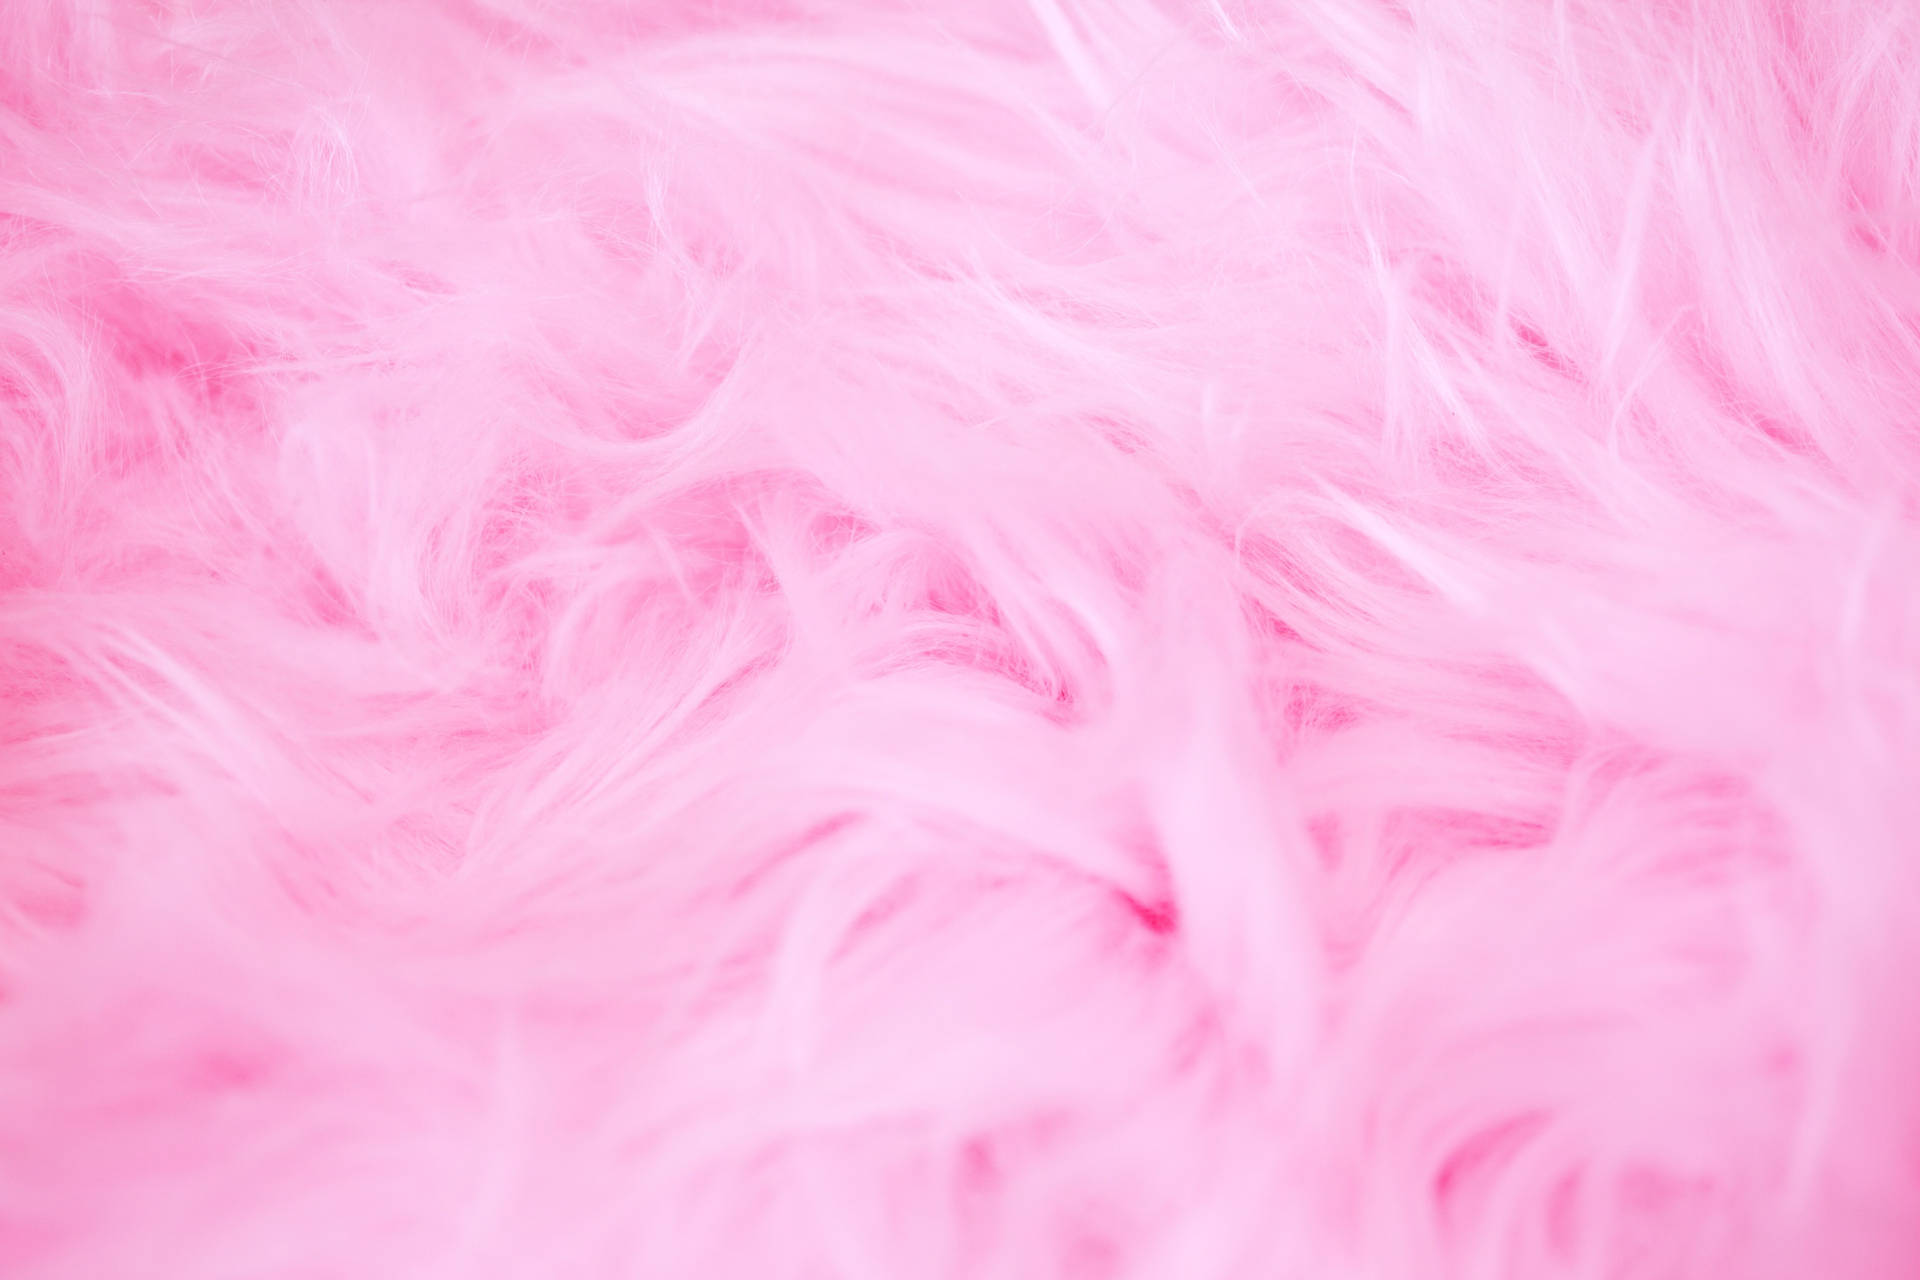 Fluffy Pink Aesthetic Girly Texture Wallpaper